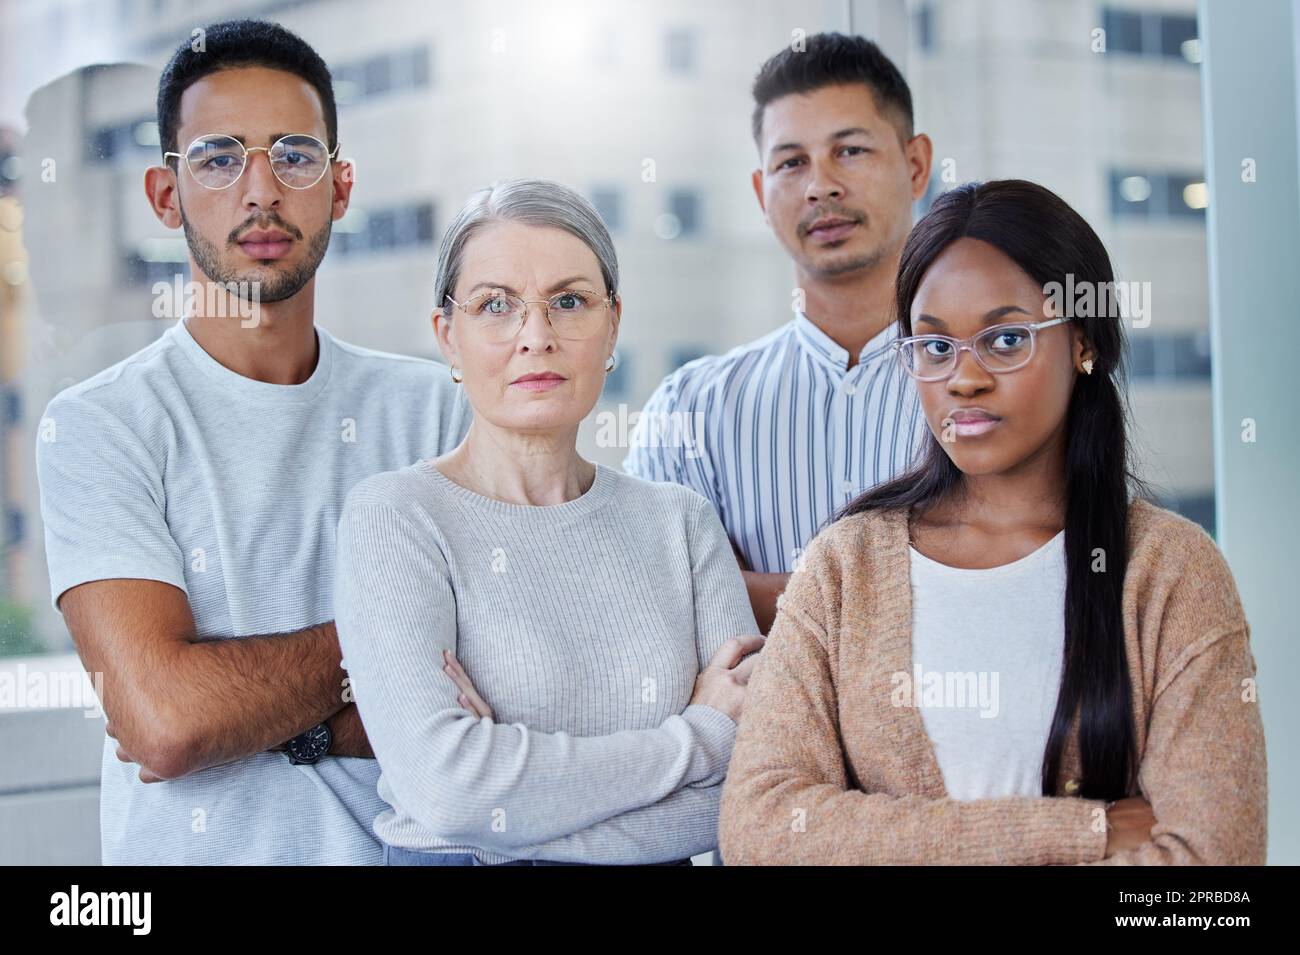 Every day at work is better than the last. a diverse team of coworkers together in their office at work. Stock Photo